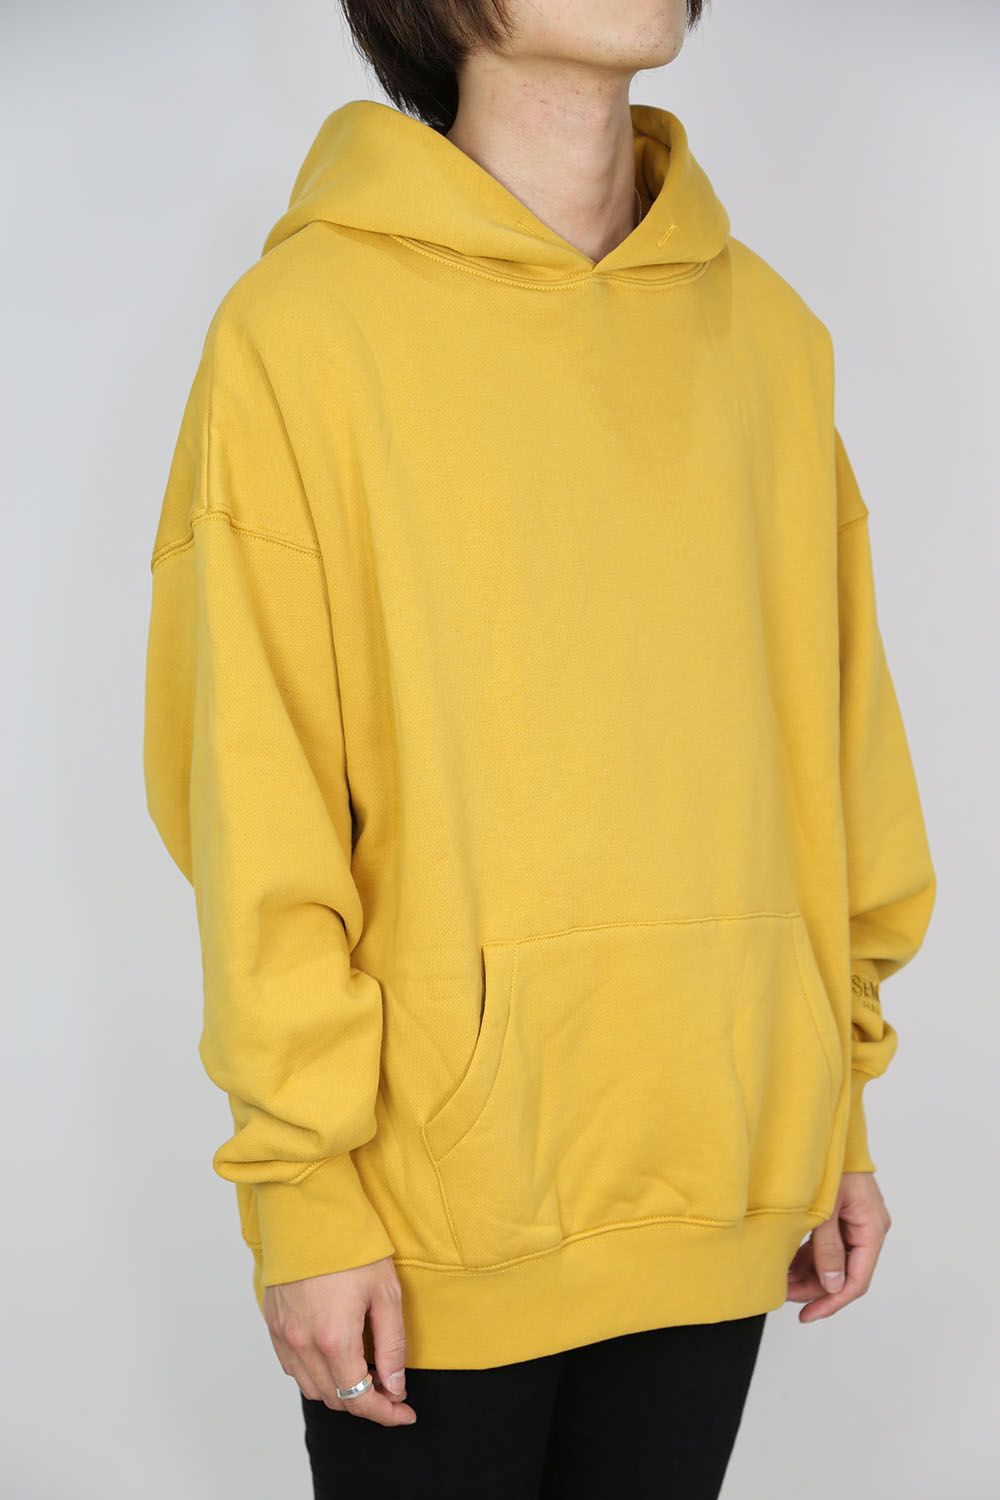 【LB限定】PULLOVER HOODIE REFLECTOR / イエロー - S